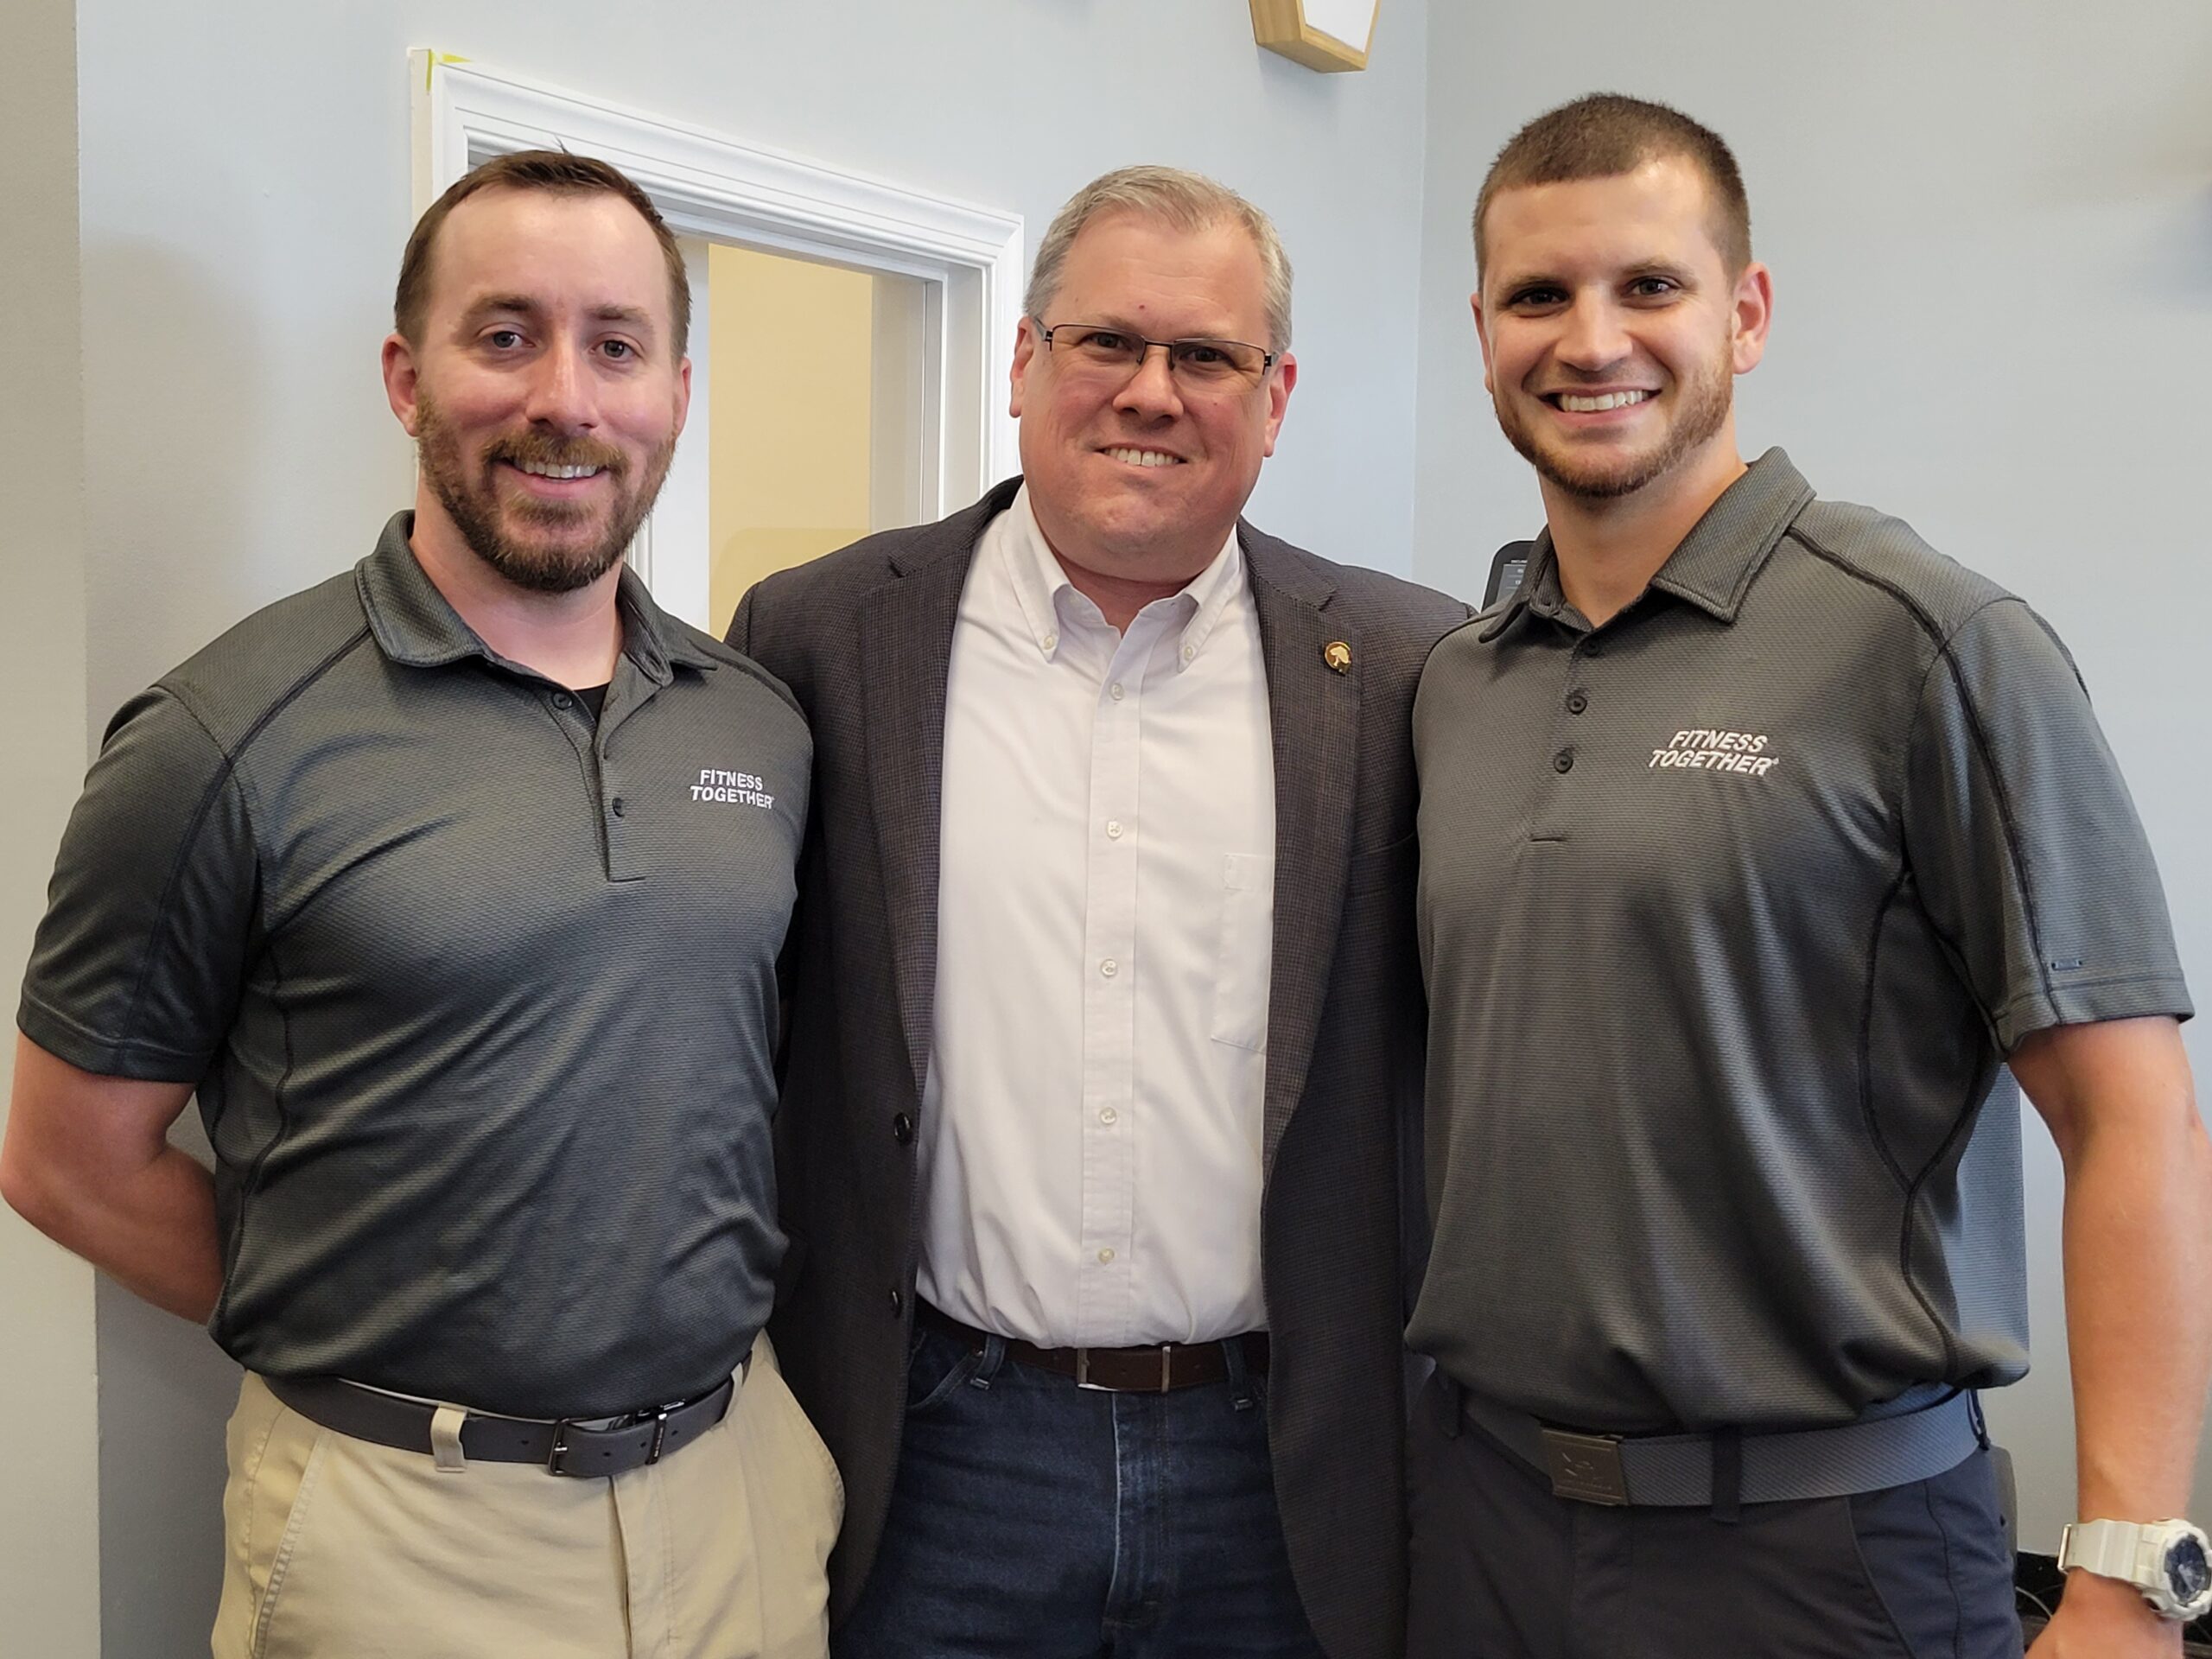 photo of Fitness Together's Chris LaVeck, Gaithersburg Mayor Jud Ashman and Fitness Together's Clark Sharp